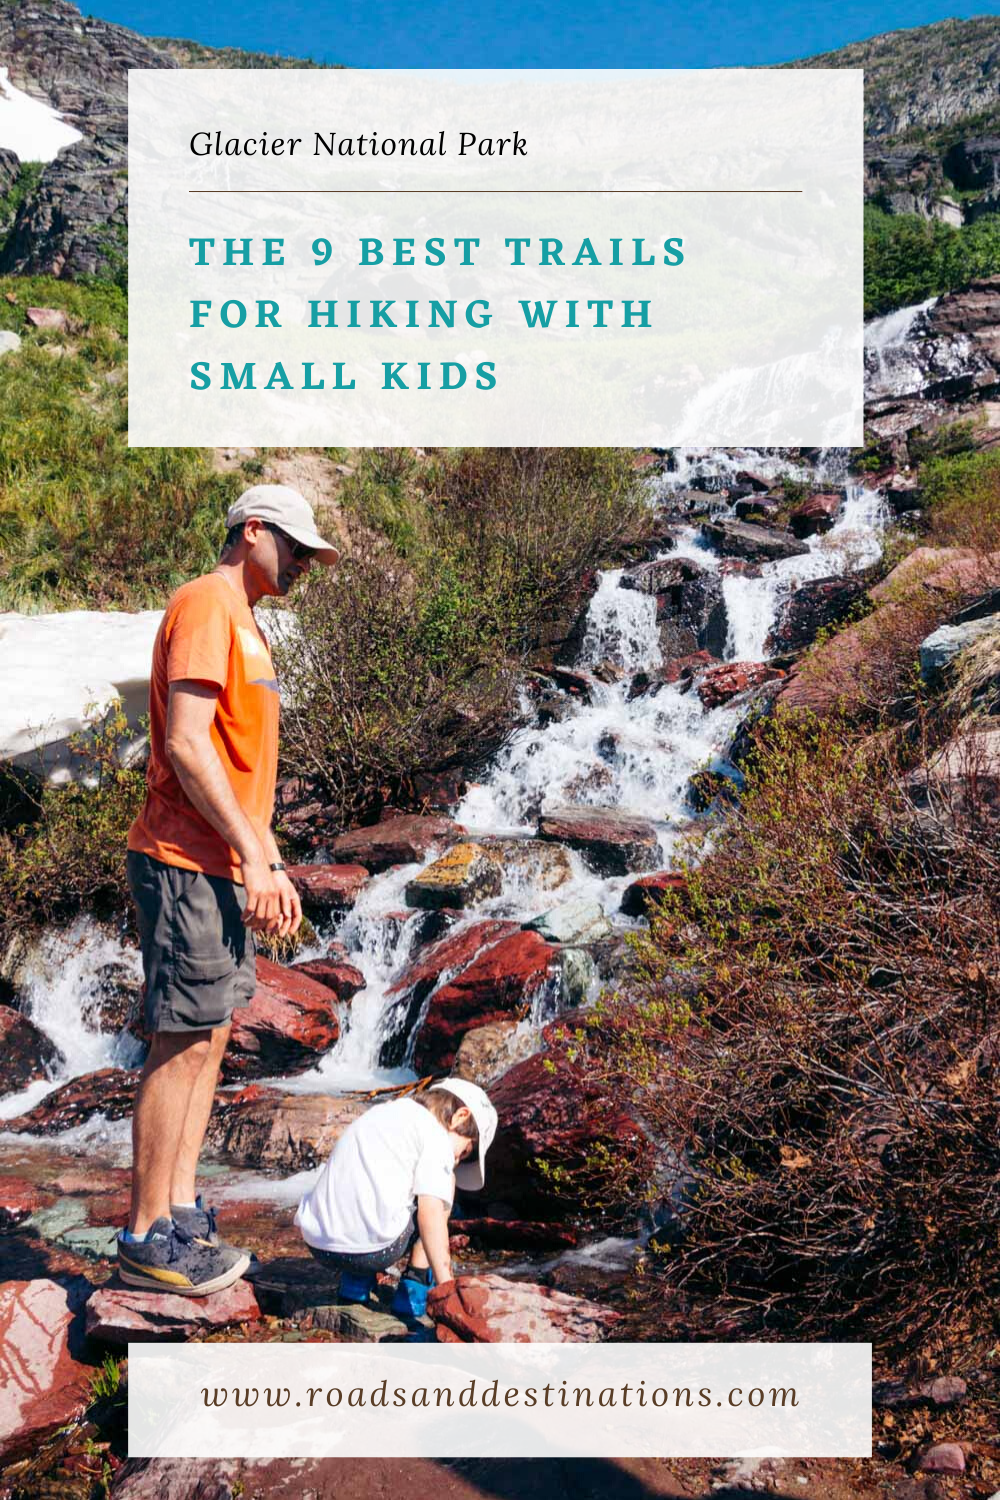 The best trails for hiking with small kids in Glacier National Park - Roads and Destinations